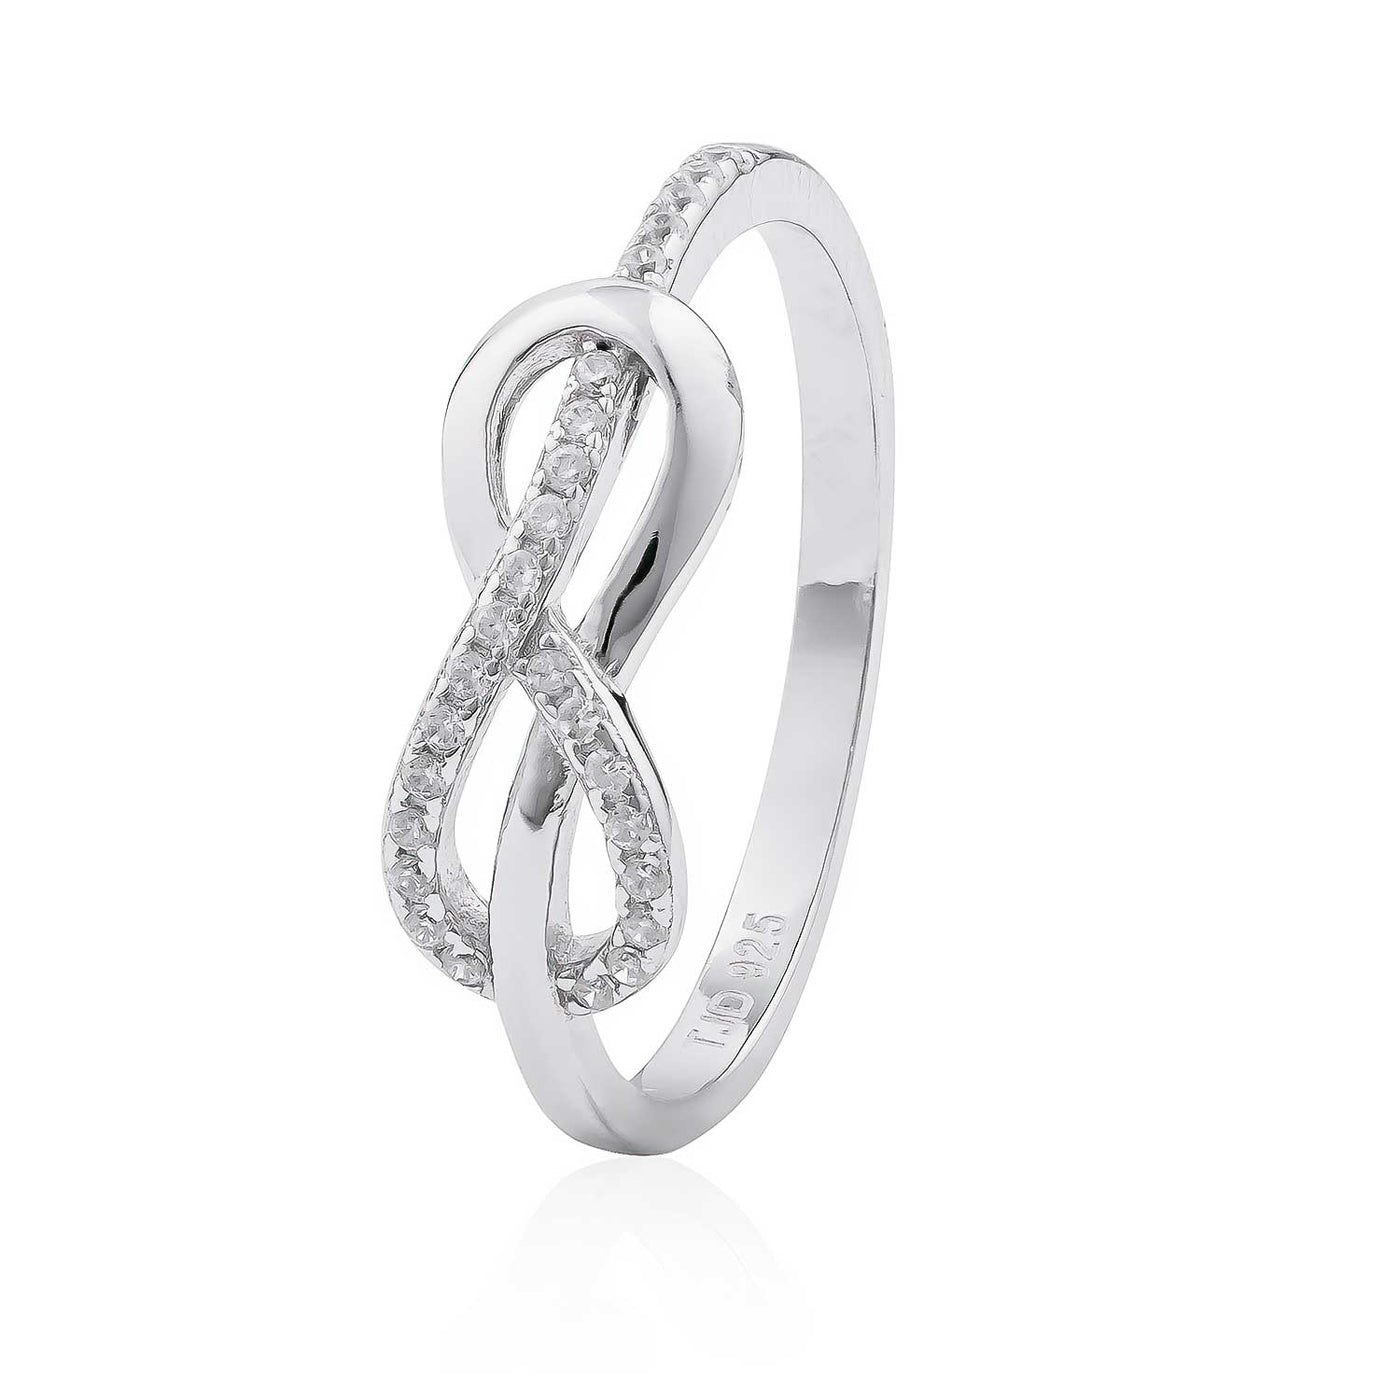 Rhodium Plated Sterling Silver CZ Infinity Ring - 7